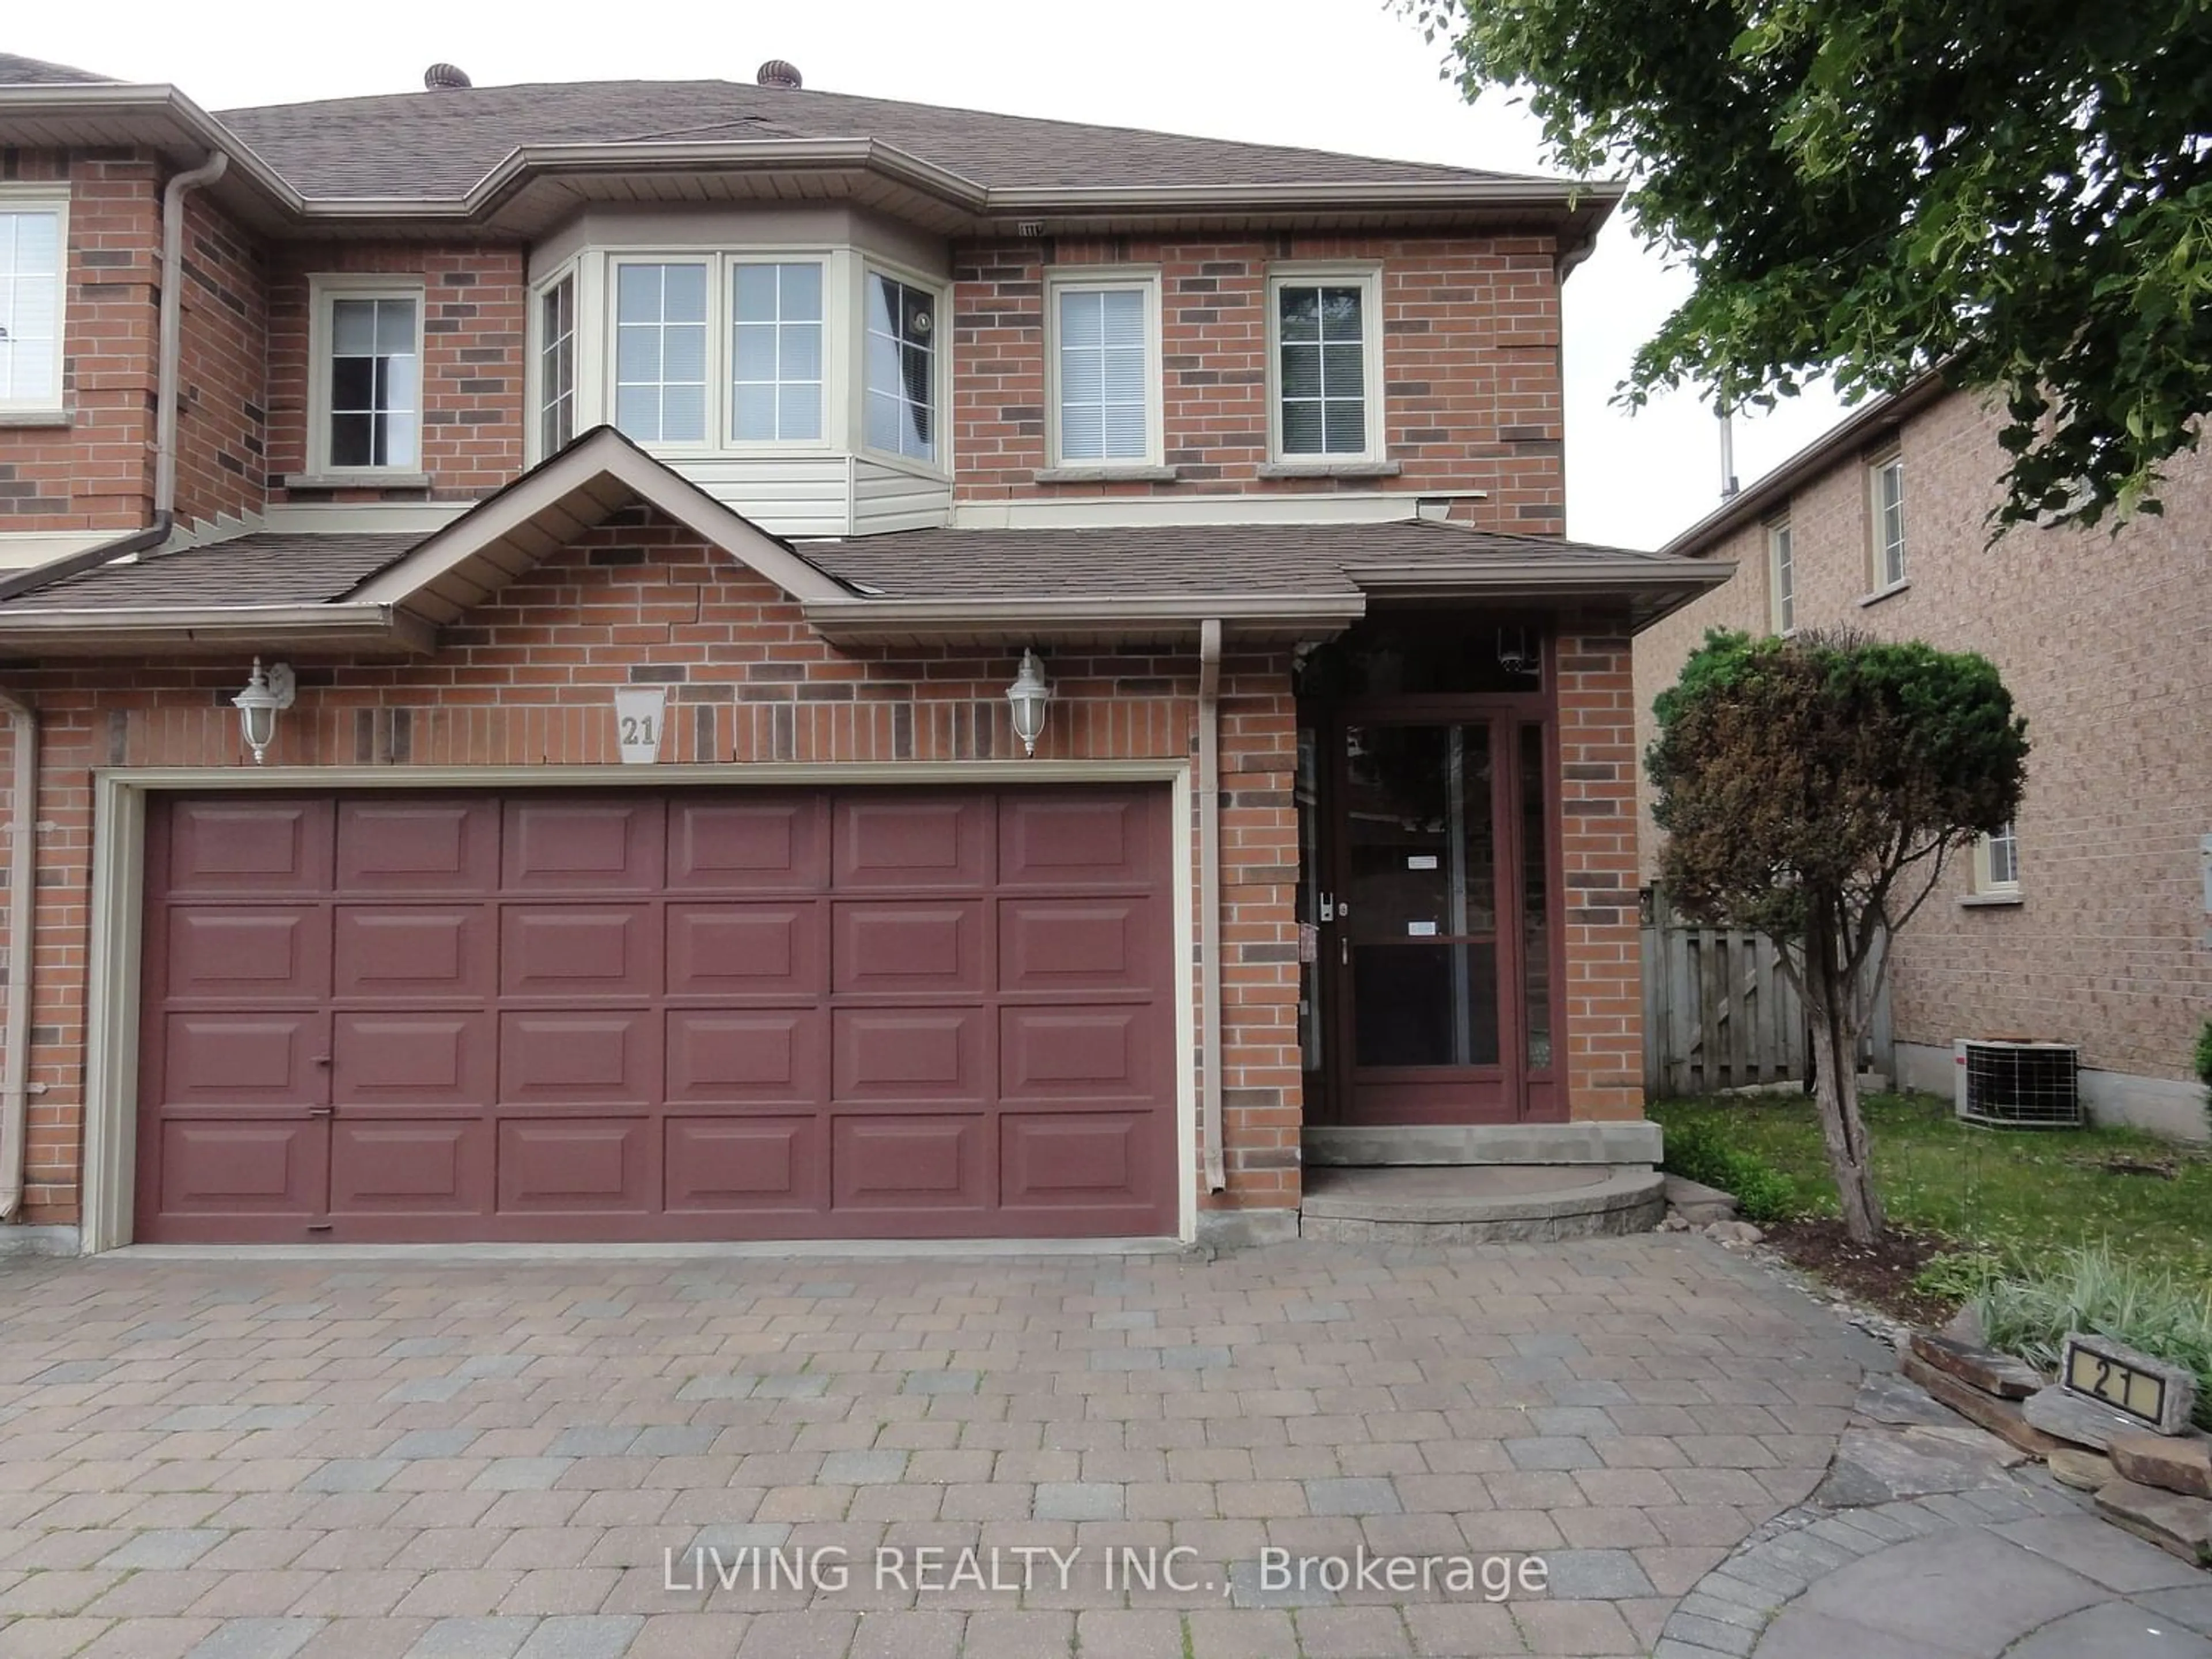 Home with brick exterior material for 50 Rubin St #21, Richmond Hill Ontario L4B 3L5